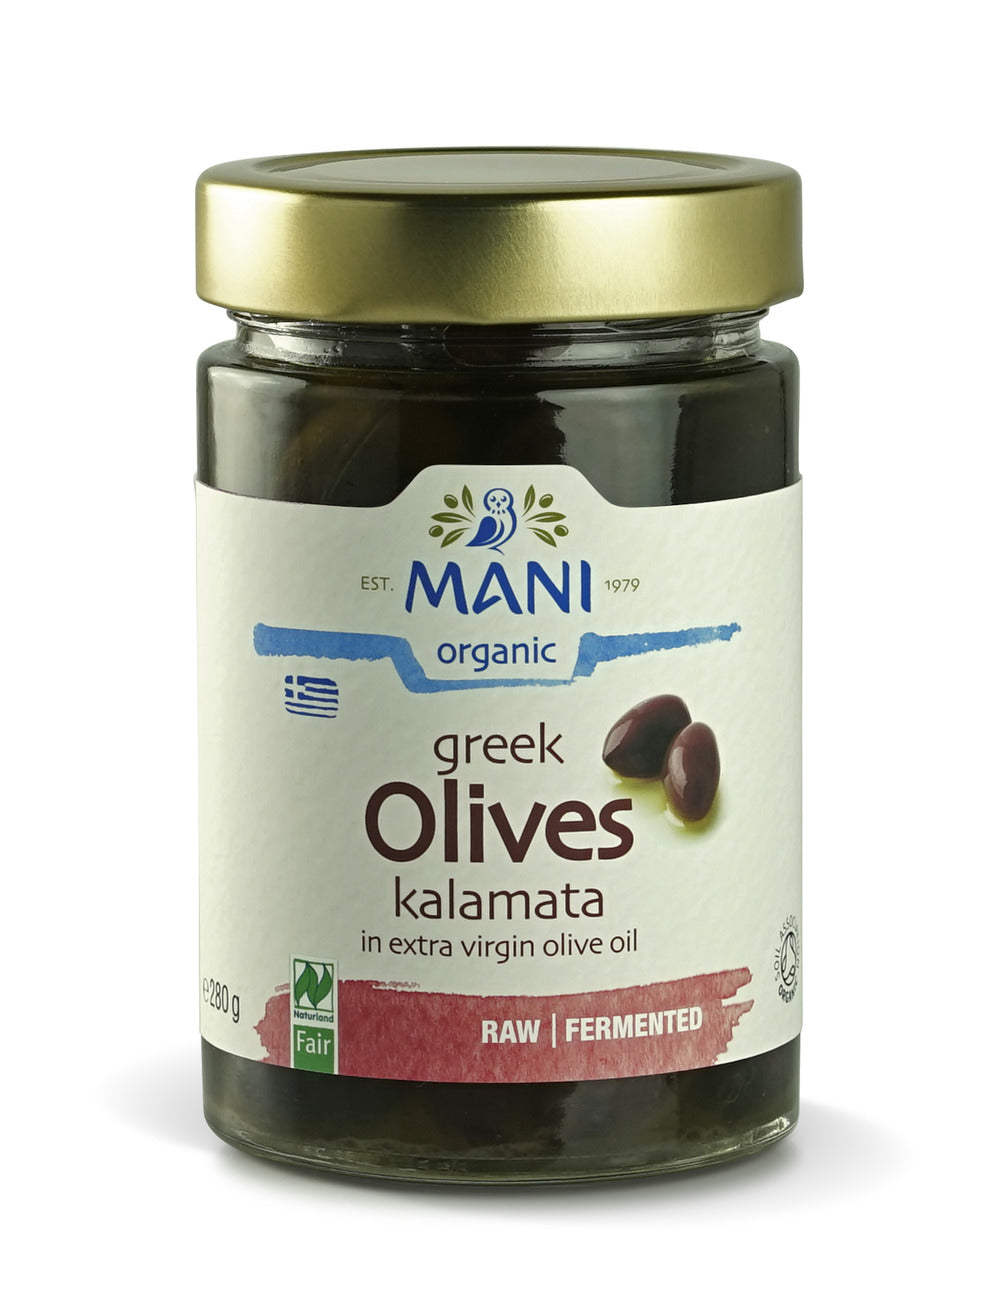 Organic Raw & Fermented Kalamata Olives in Extra Virgin Olive Oil 205g